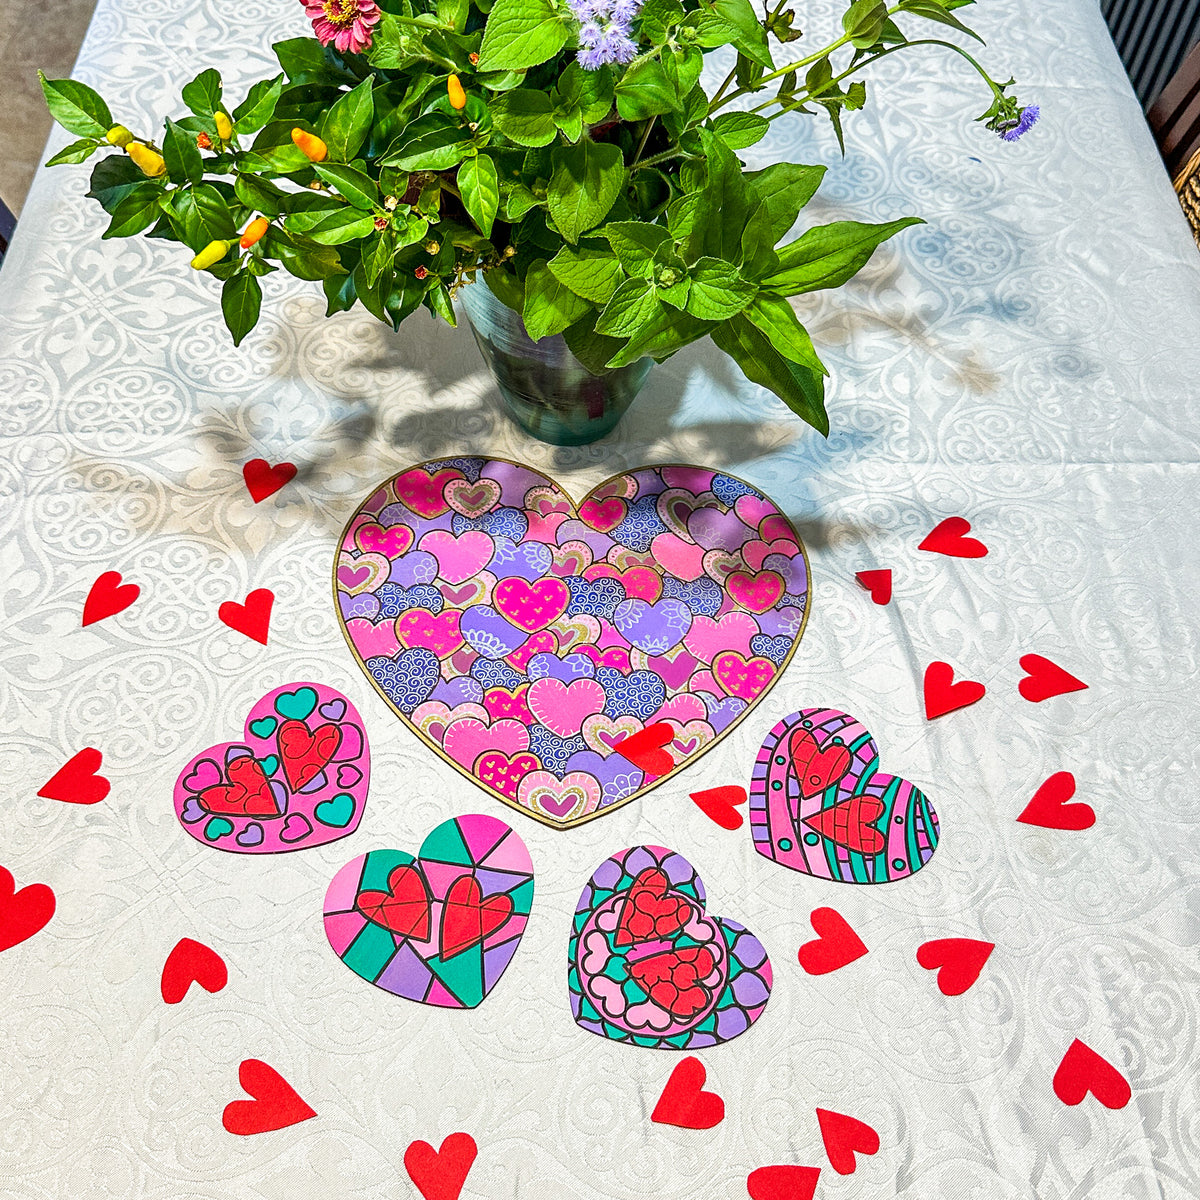 Colourful Hearts Valentine&#39;s Day Large Gift Set - 4 Love Heart coasters and 1 Large Hearts Board with acrylic markers